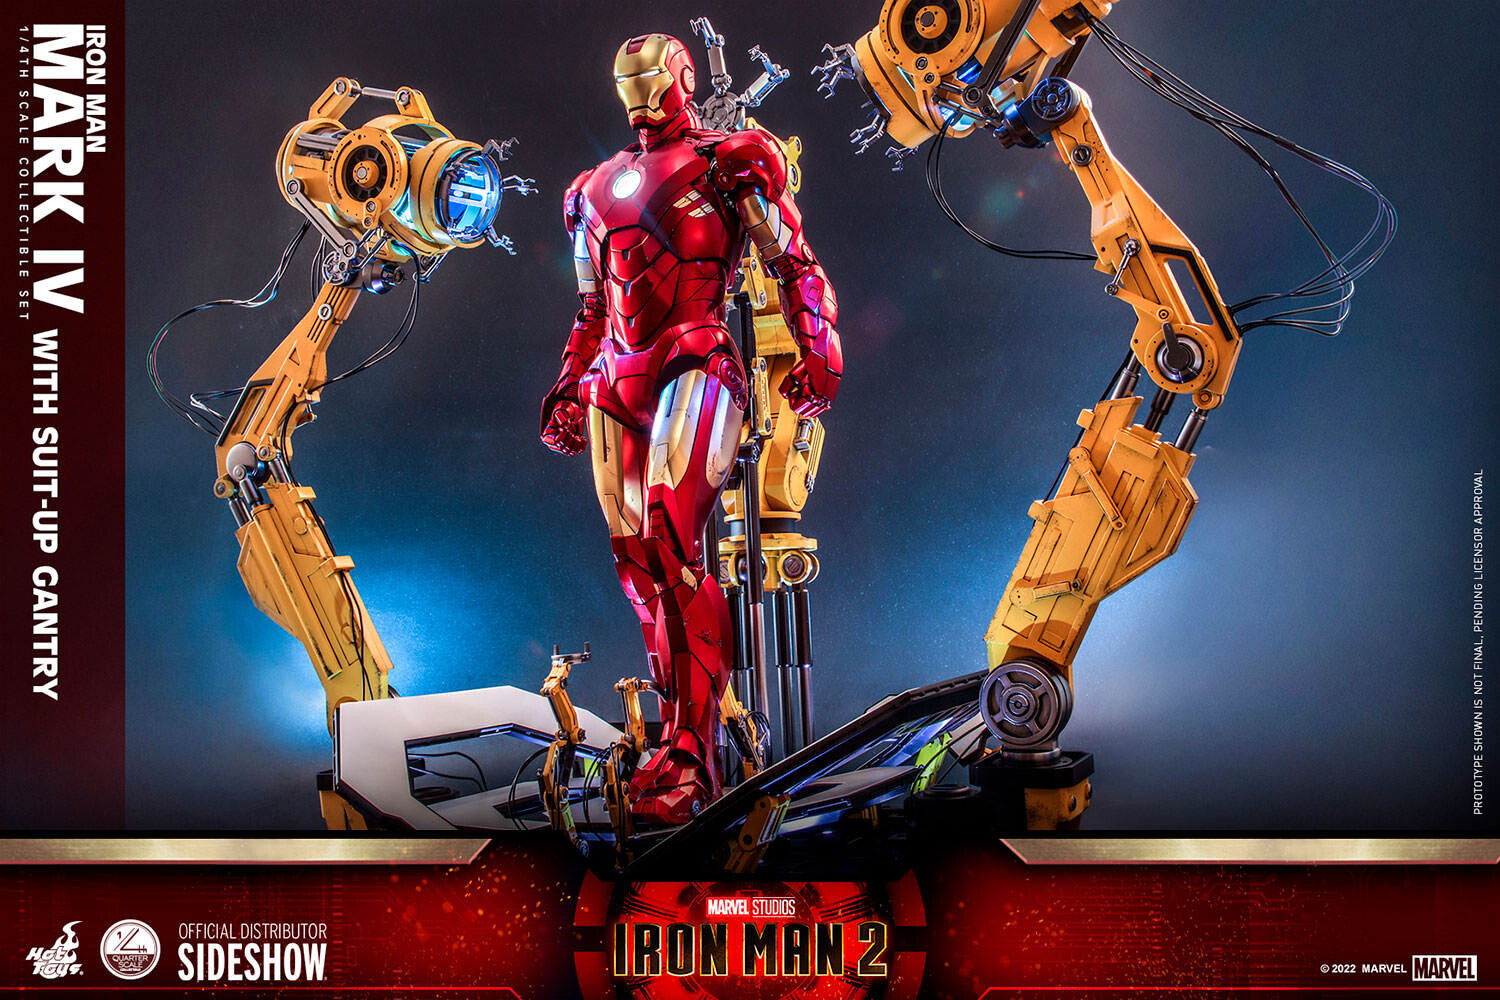 Iron Man Mark IV With Suit-Up Gantry Quarter Scale Collectible Set